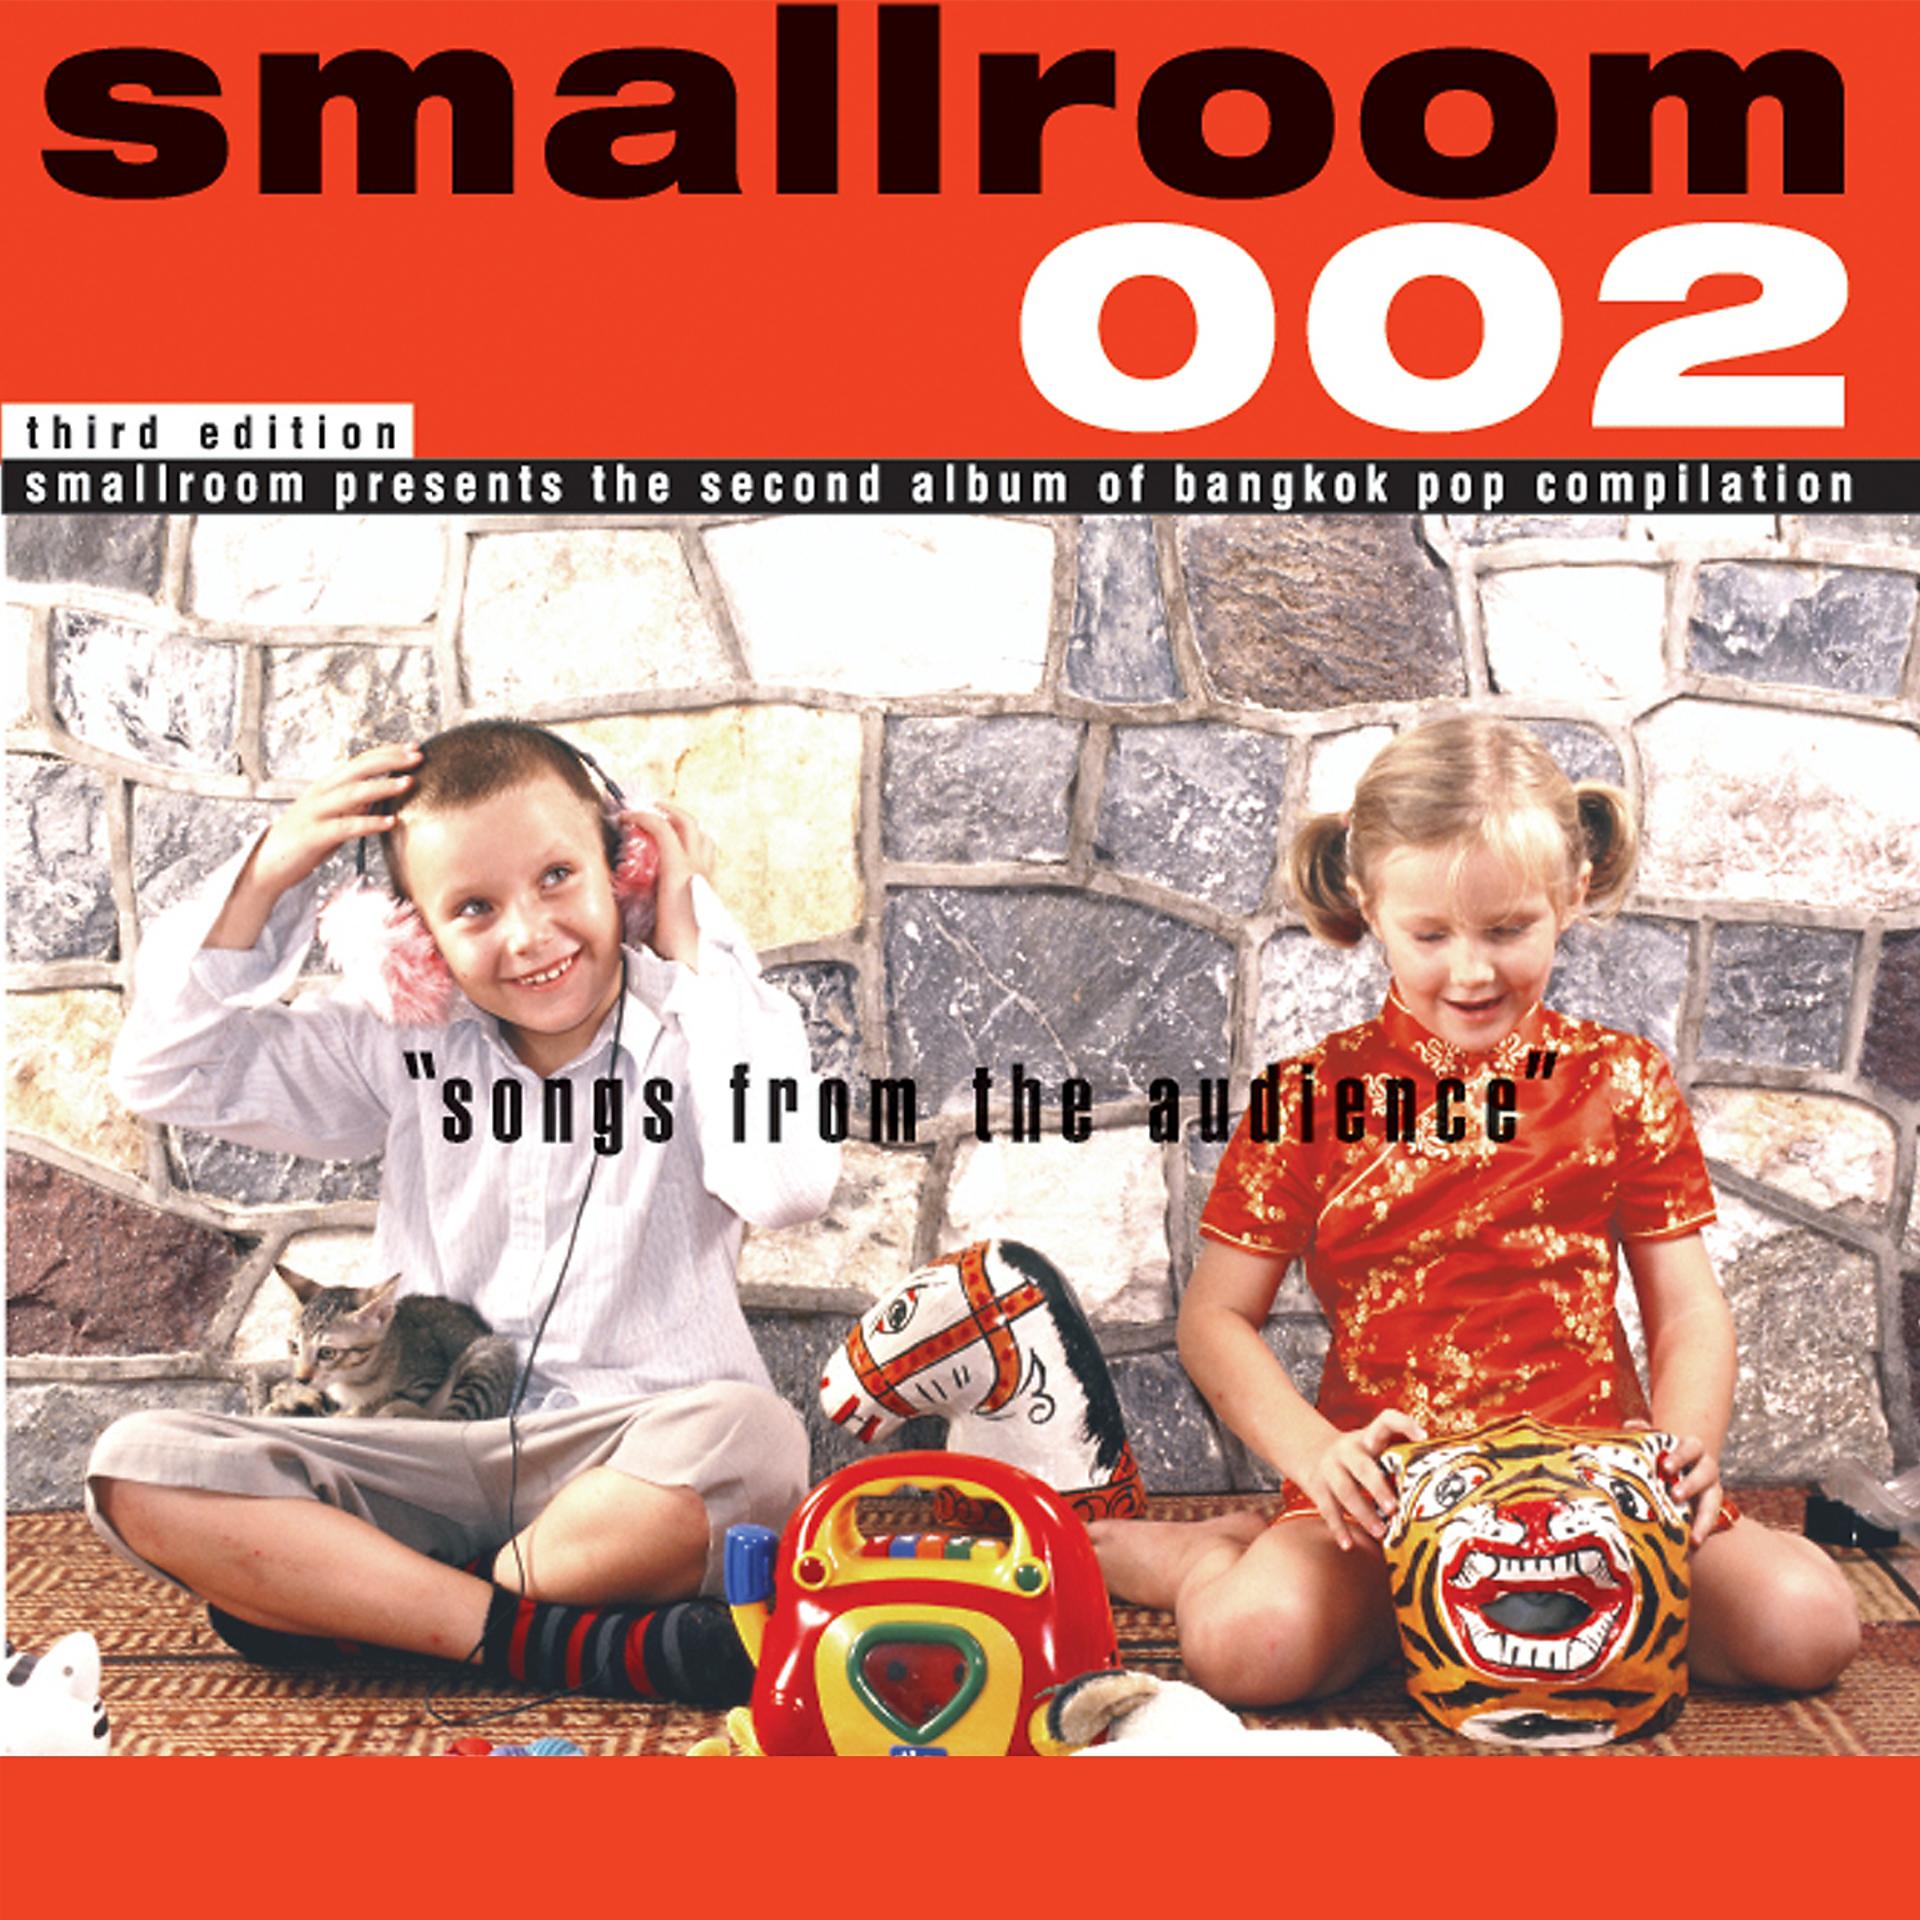 Постер альбома Smallroom 002 - Songs from the Audience